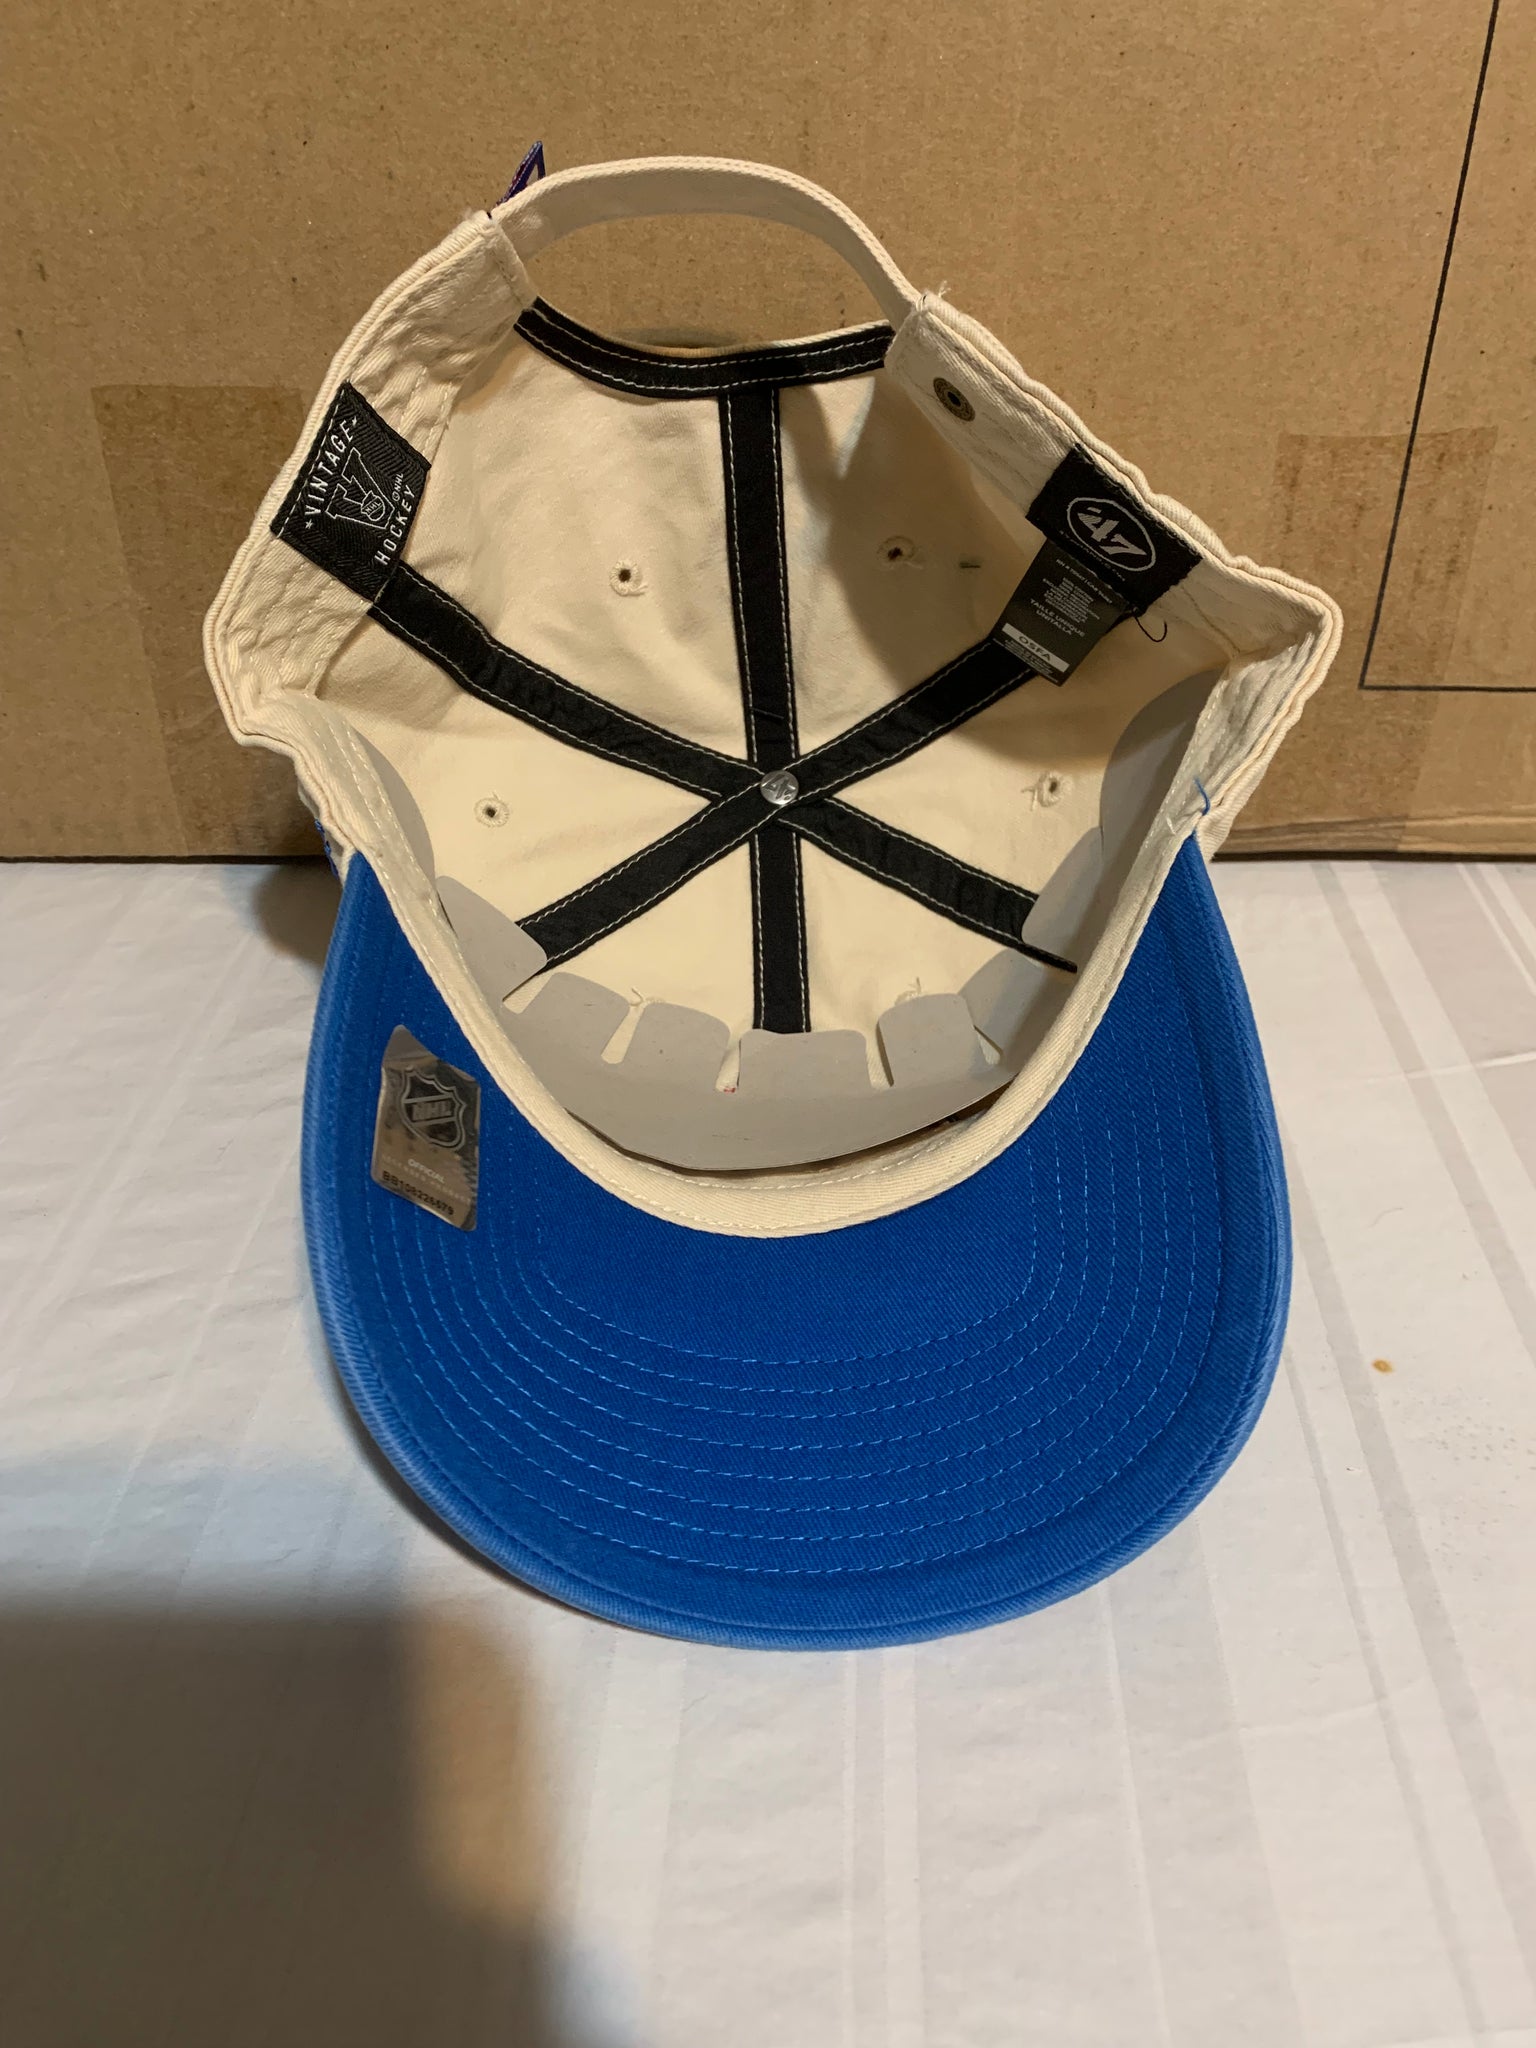 St. Louis Blues NHL '47 Brand Throwback Natural Two Tone Clean Up  Adjustable Hat